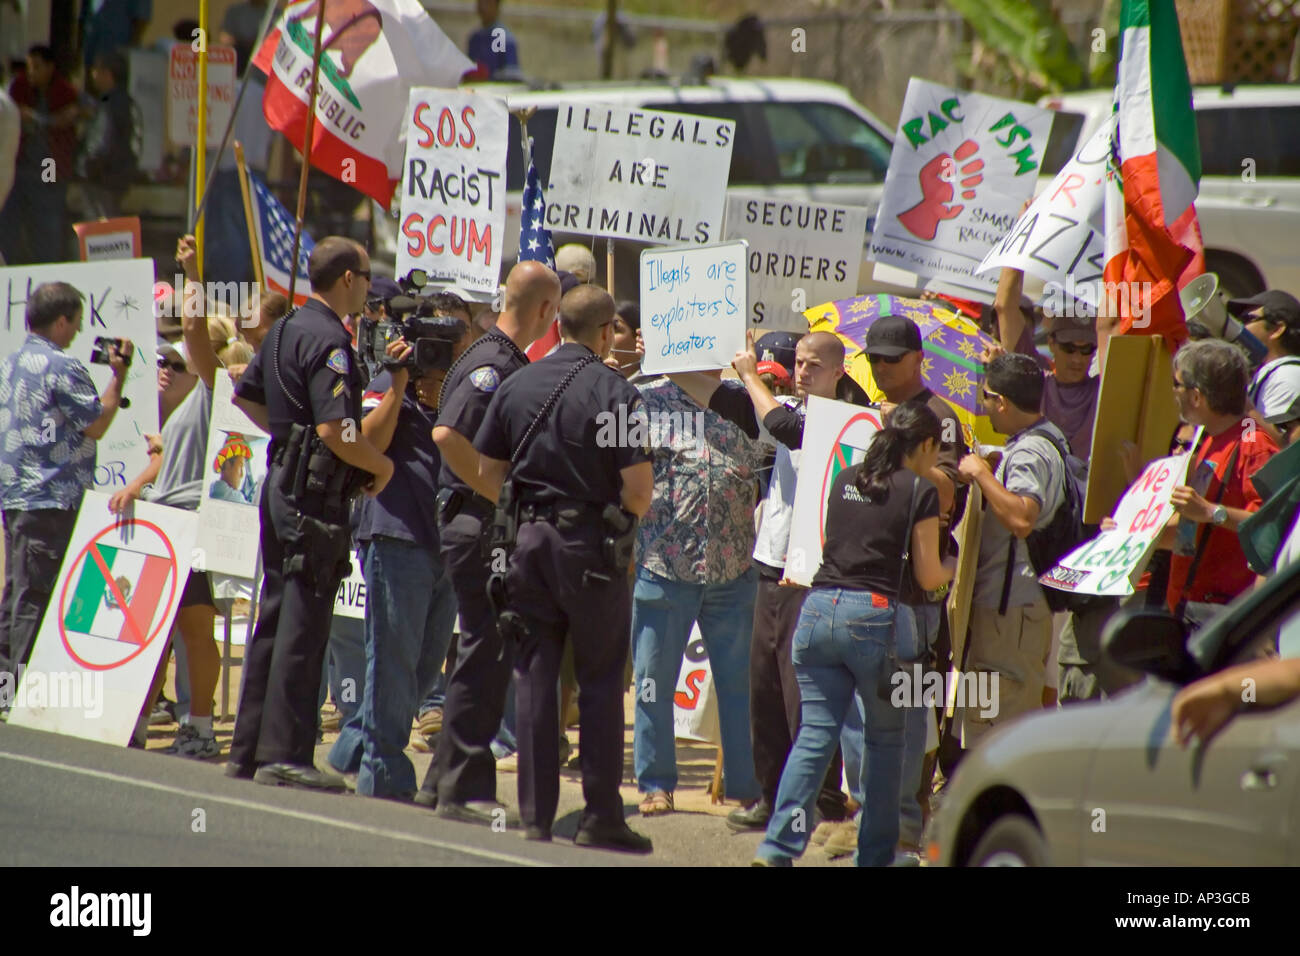 Police question counter demonstrators's sign at pro-day laborer demonstration at a hiring site in Laguna Beach, CA. Stock Photo